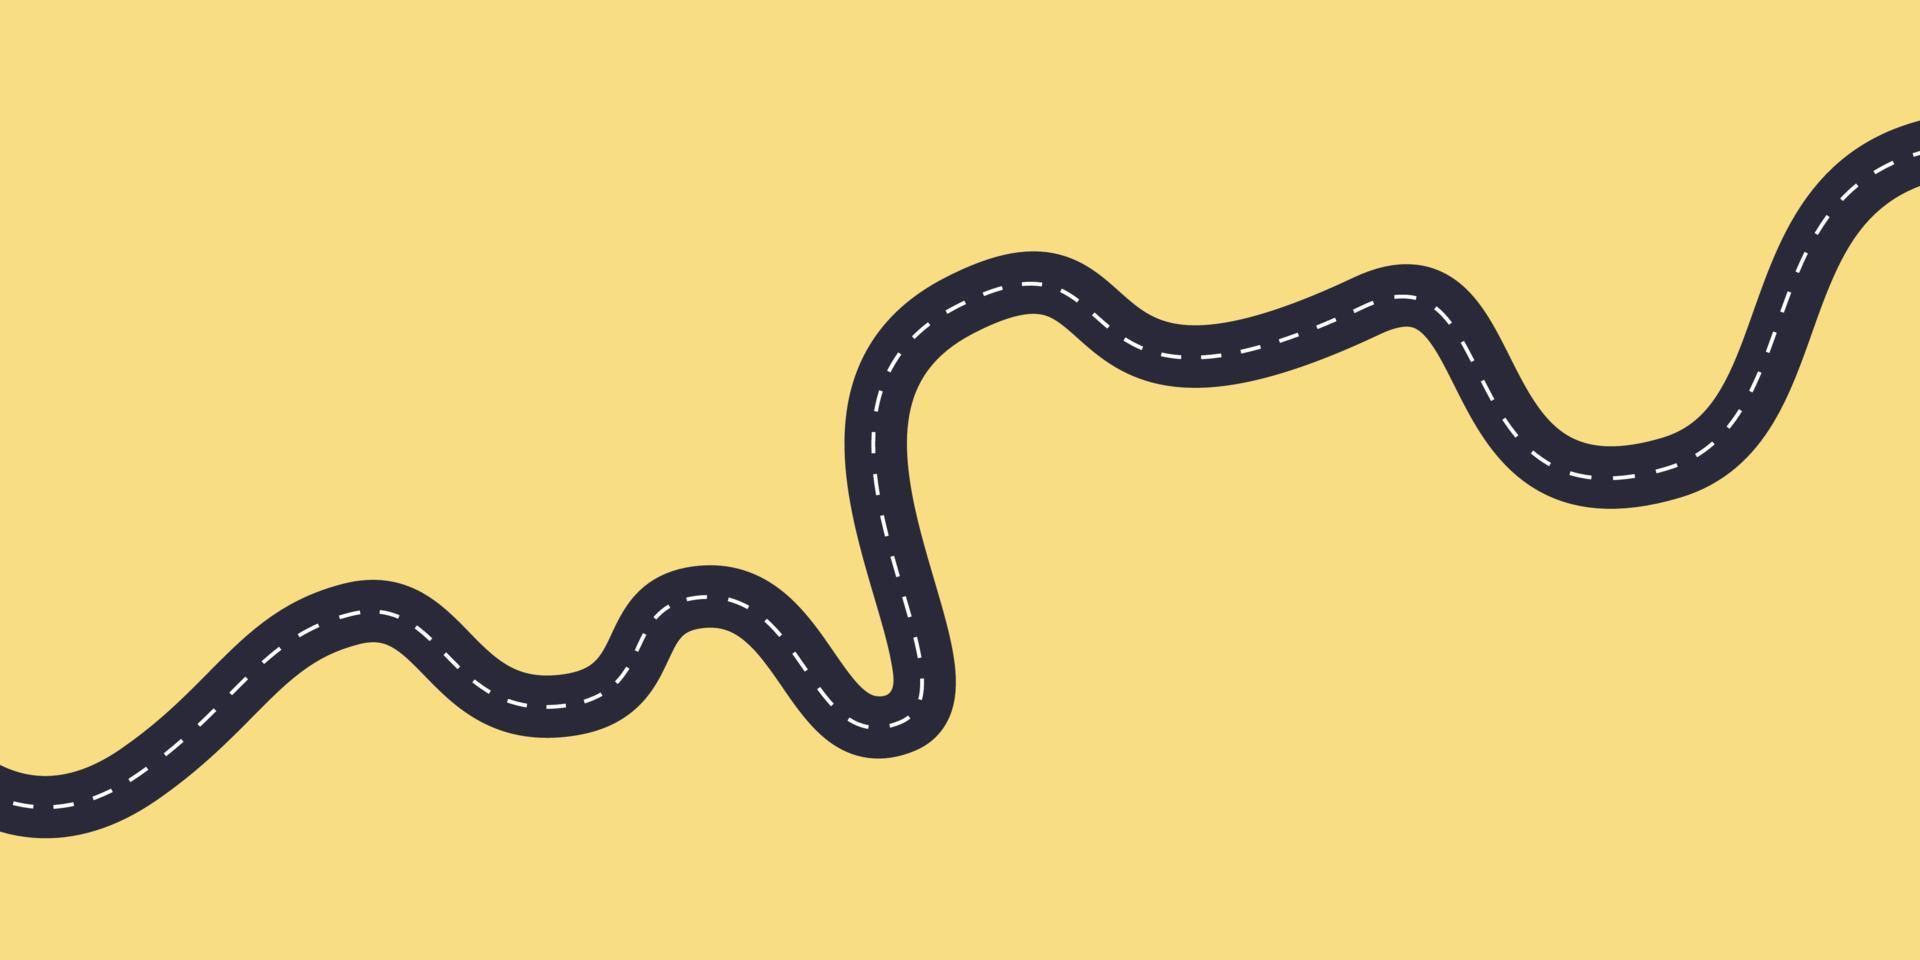 Winding road on one color background. Vector stock illustration.